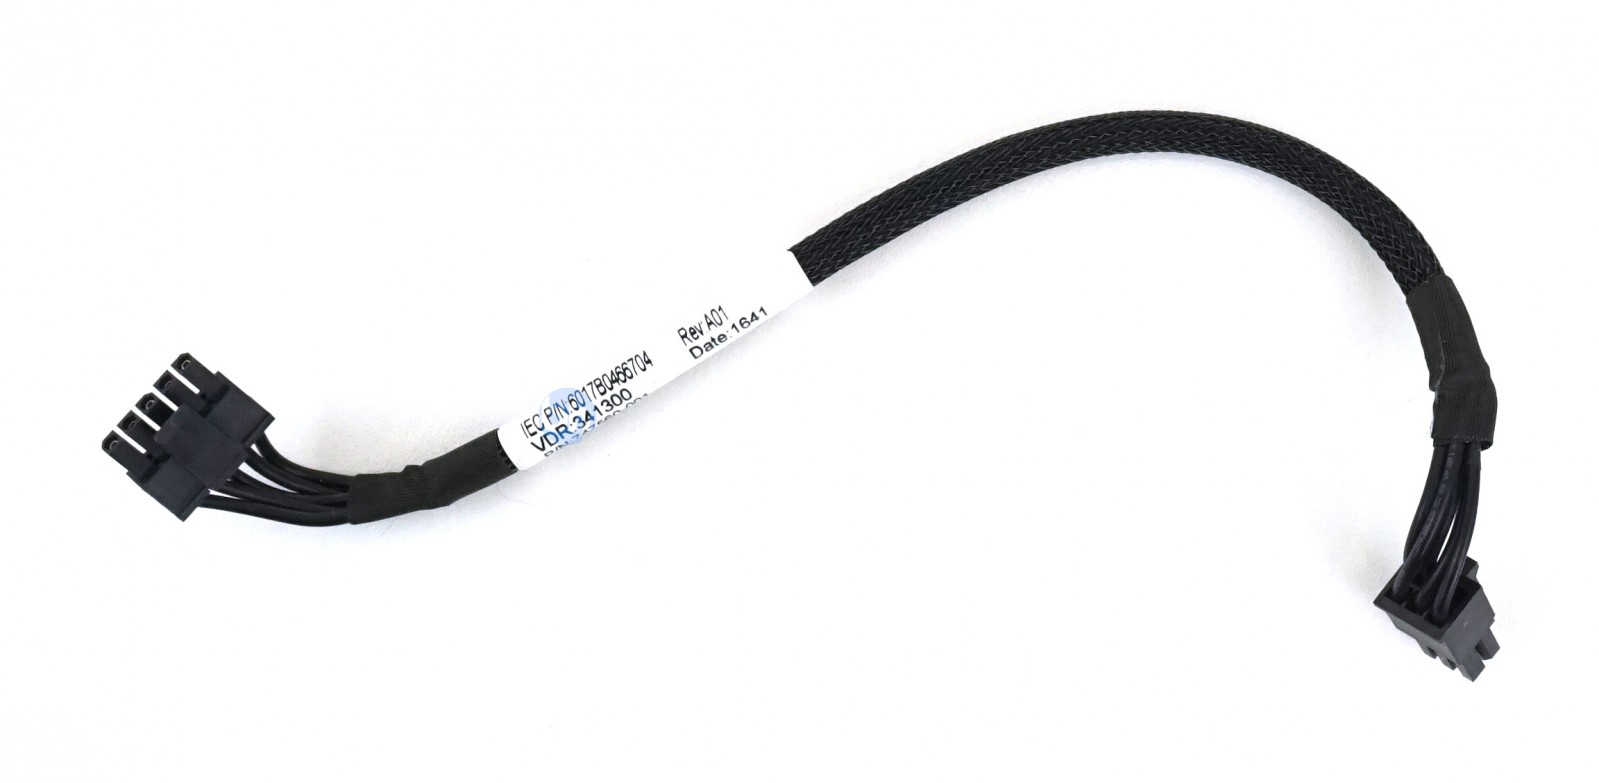 For HP dl380 g9 g10 Expansion Backplane Power Cable 747560-001 